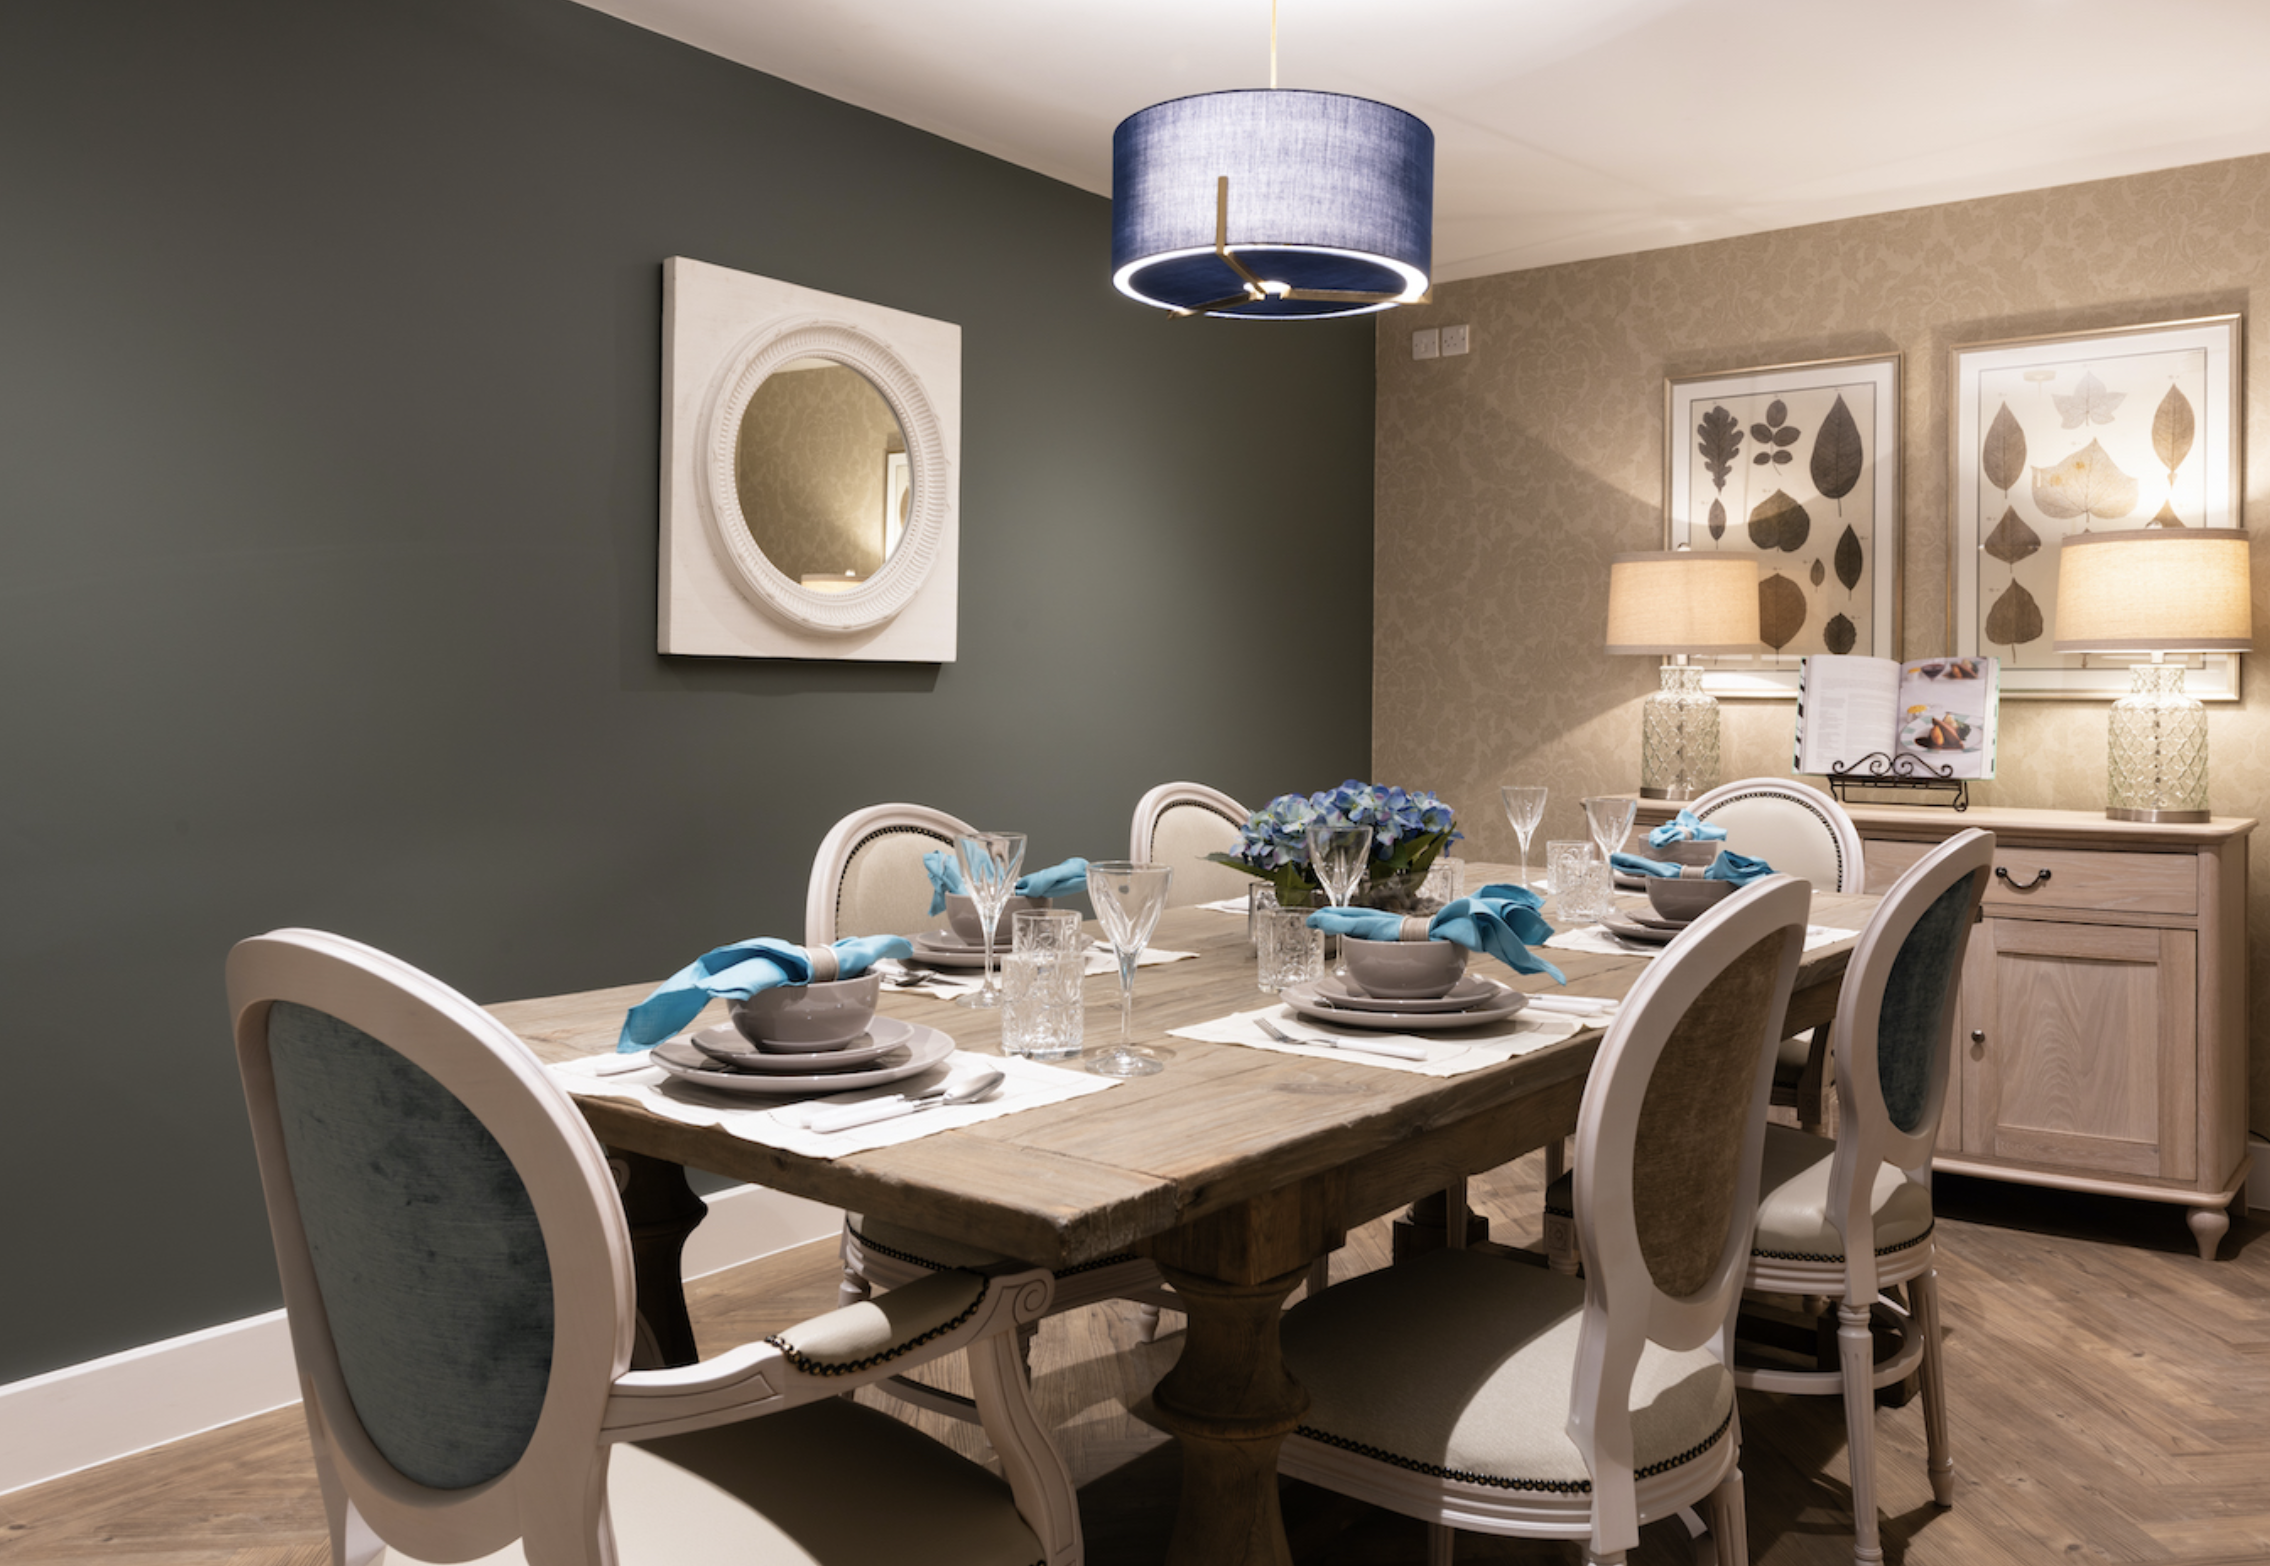 Private dining room of Riverdale care home in Braintree, Essex